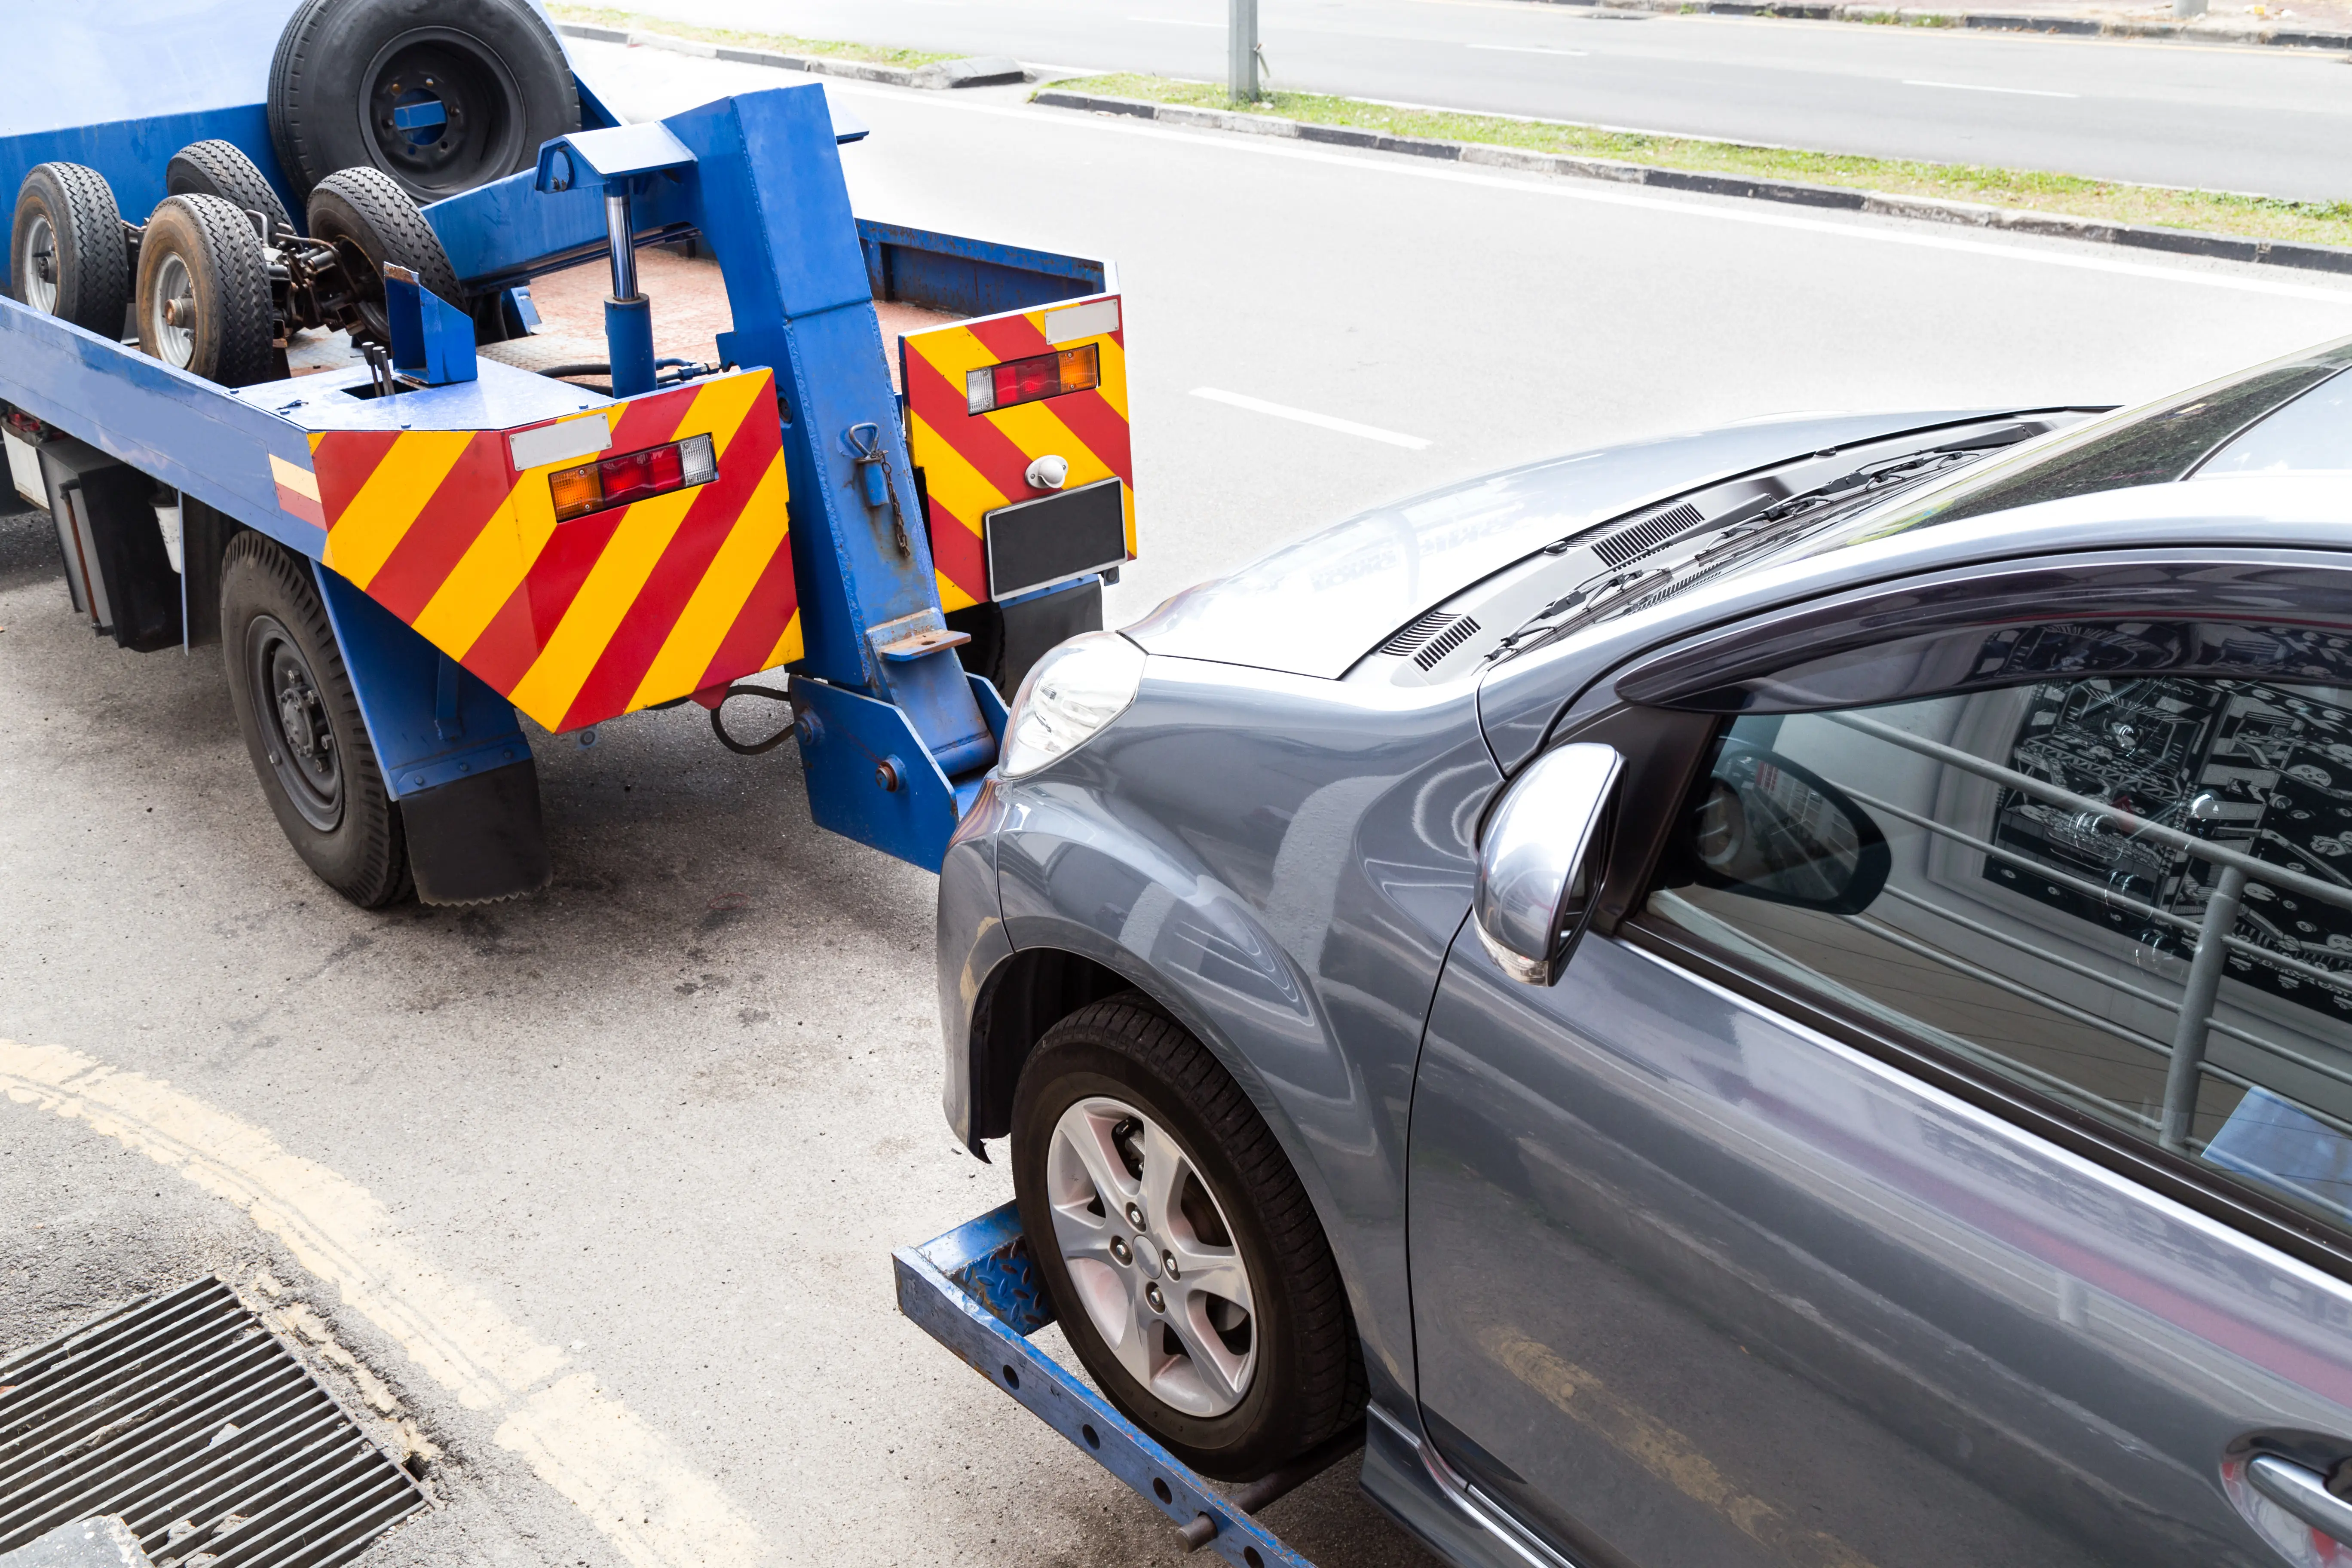 Exclusive-Towing-Service-Leads--in-Orlando-Florida-Exclusive-Towing-Service-Leads-15164-image